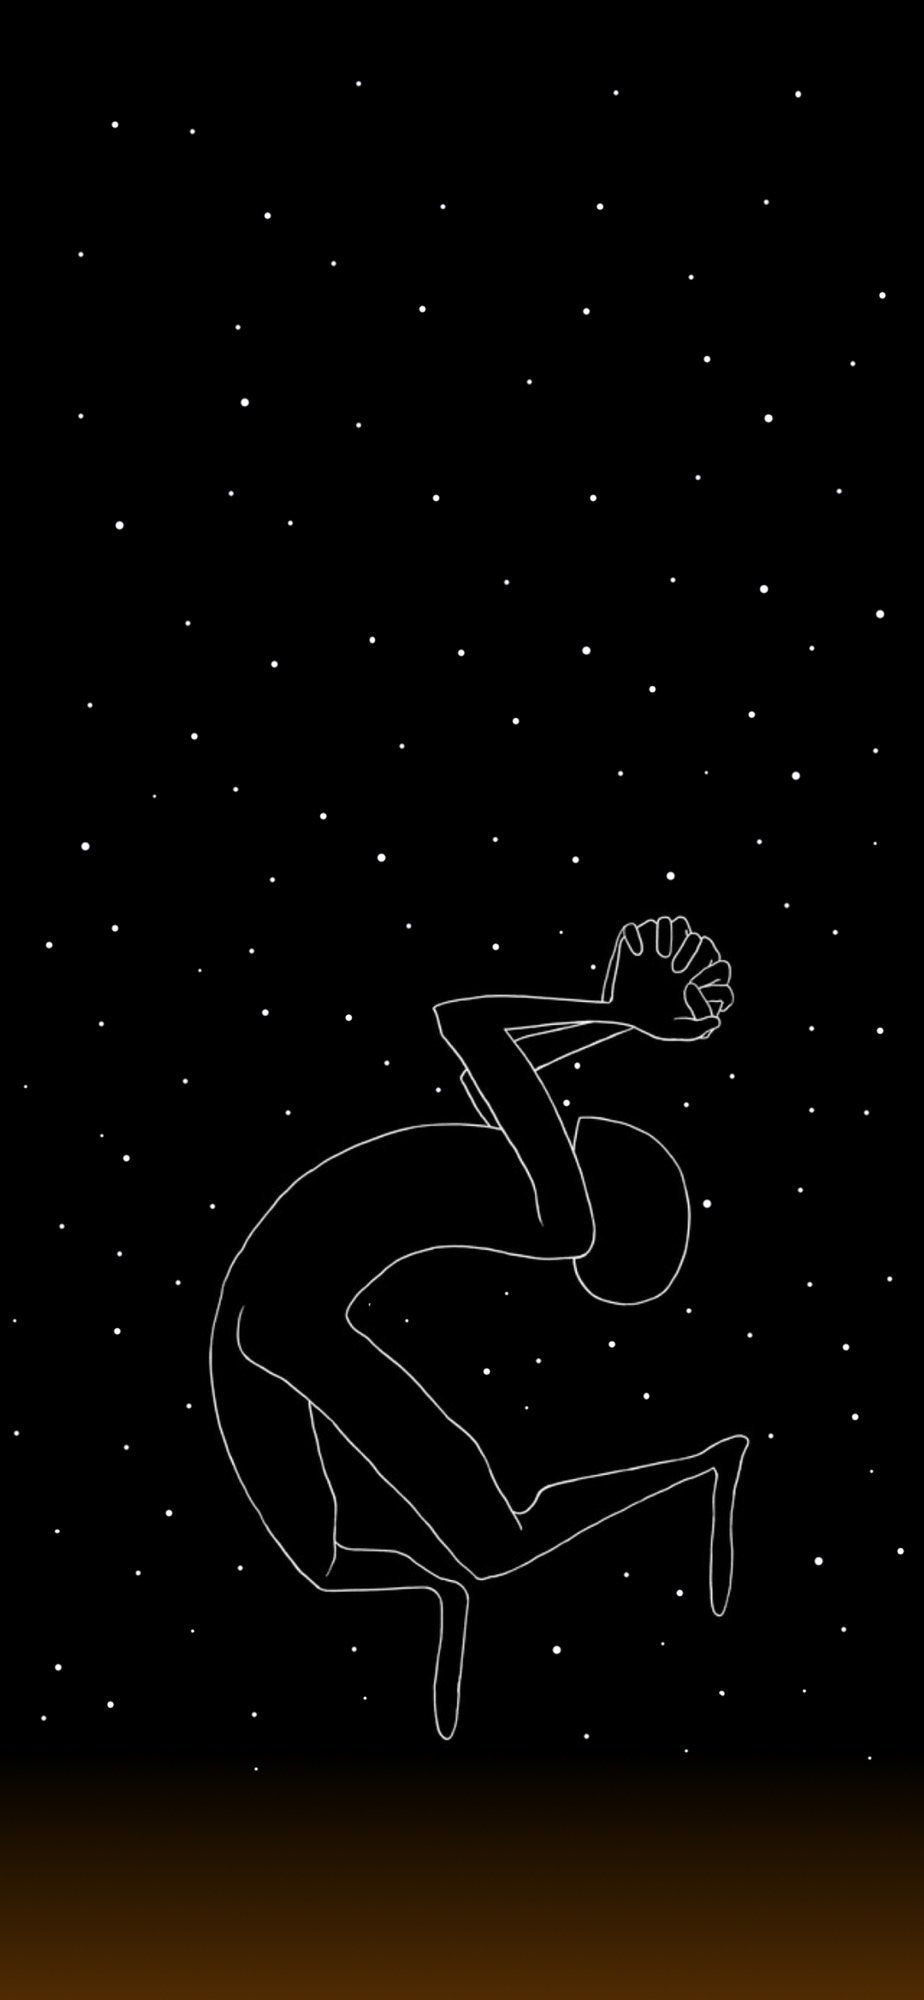 Line art of a person sitting on the ground with their arms wrapped around their knees, against a starry black background - Markiplier